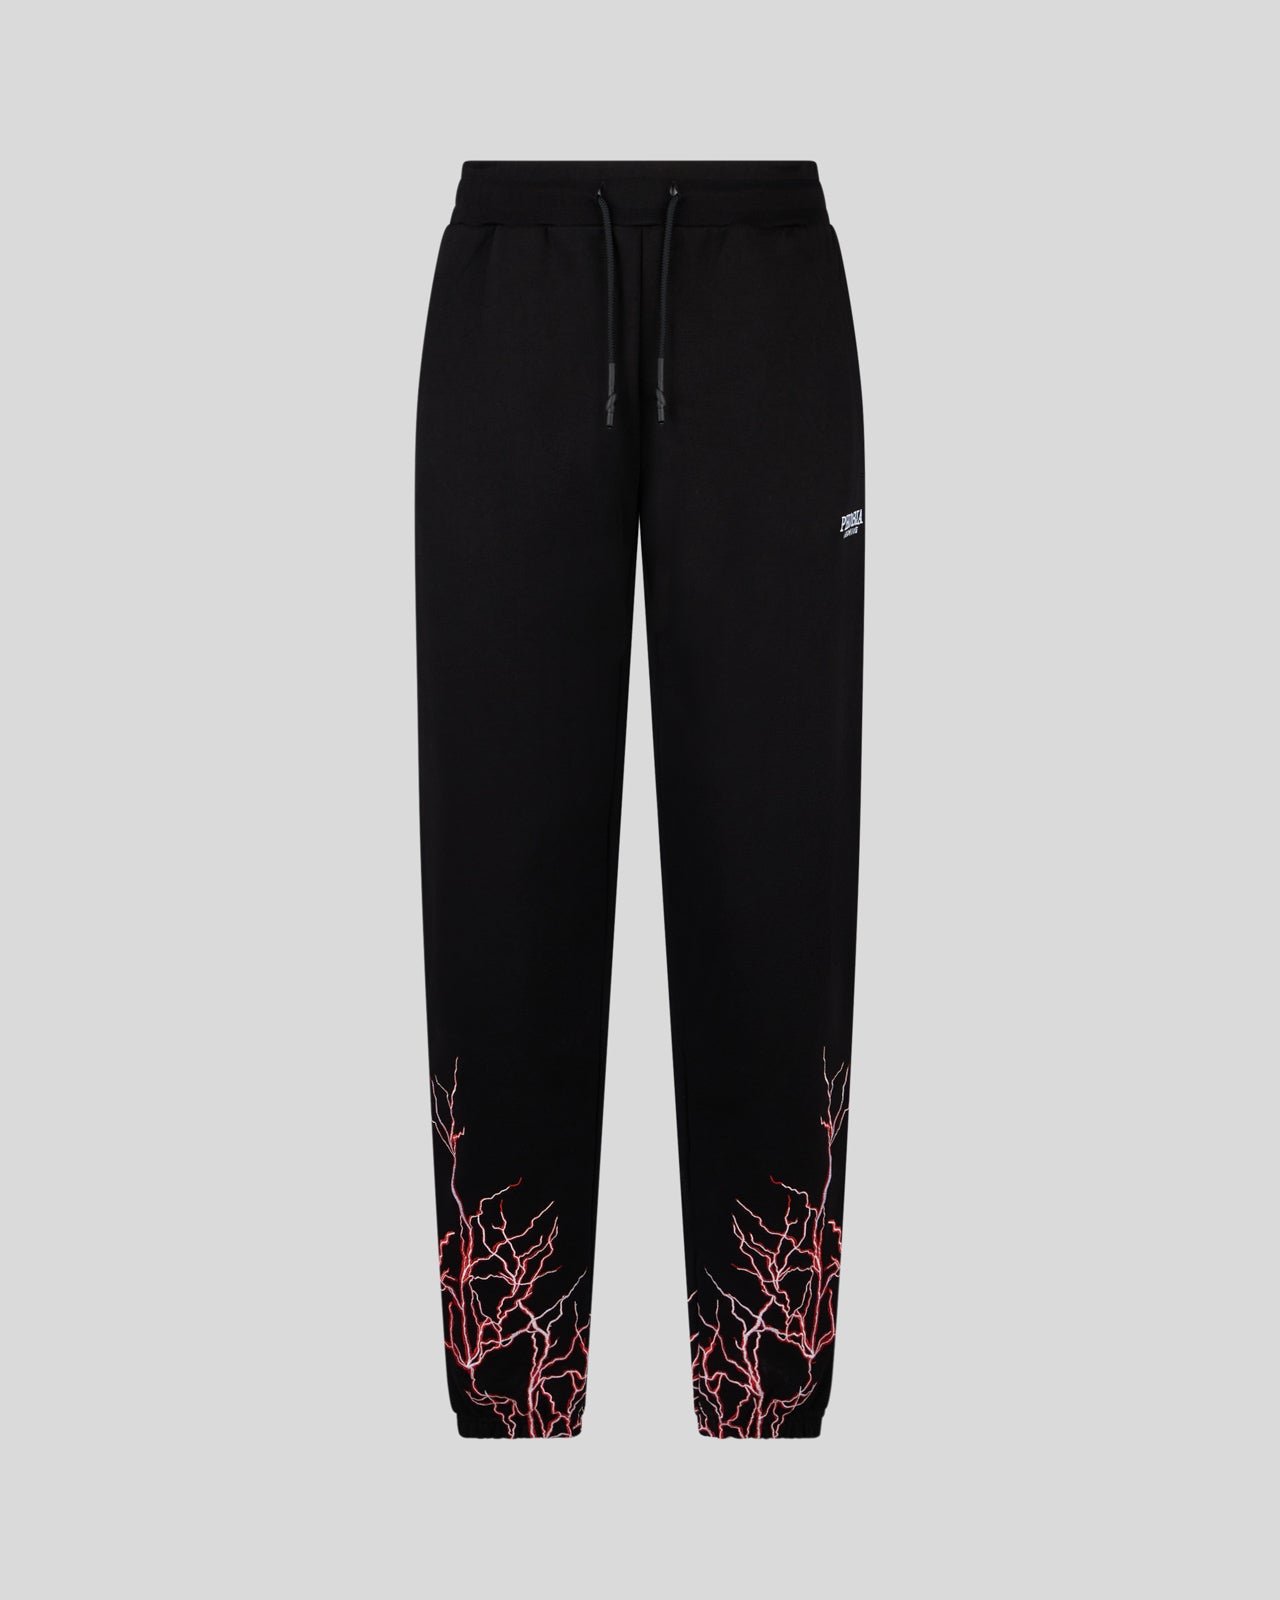 PHOBIA BLACK PANT WITH RED EMBROIDERY LIGHTNING